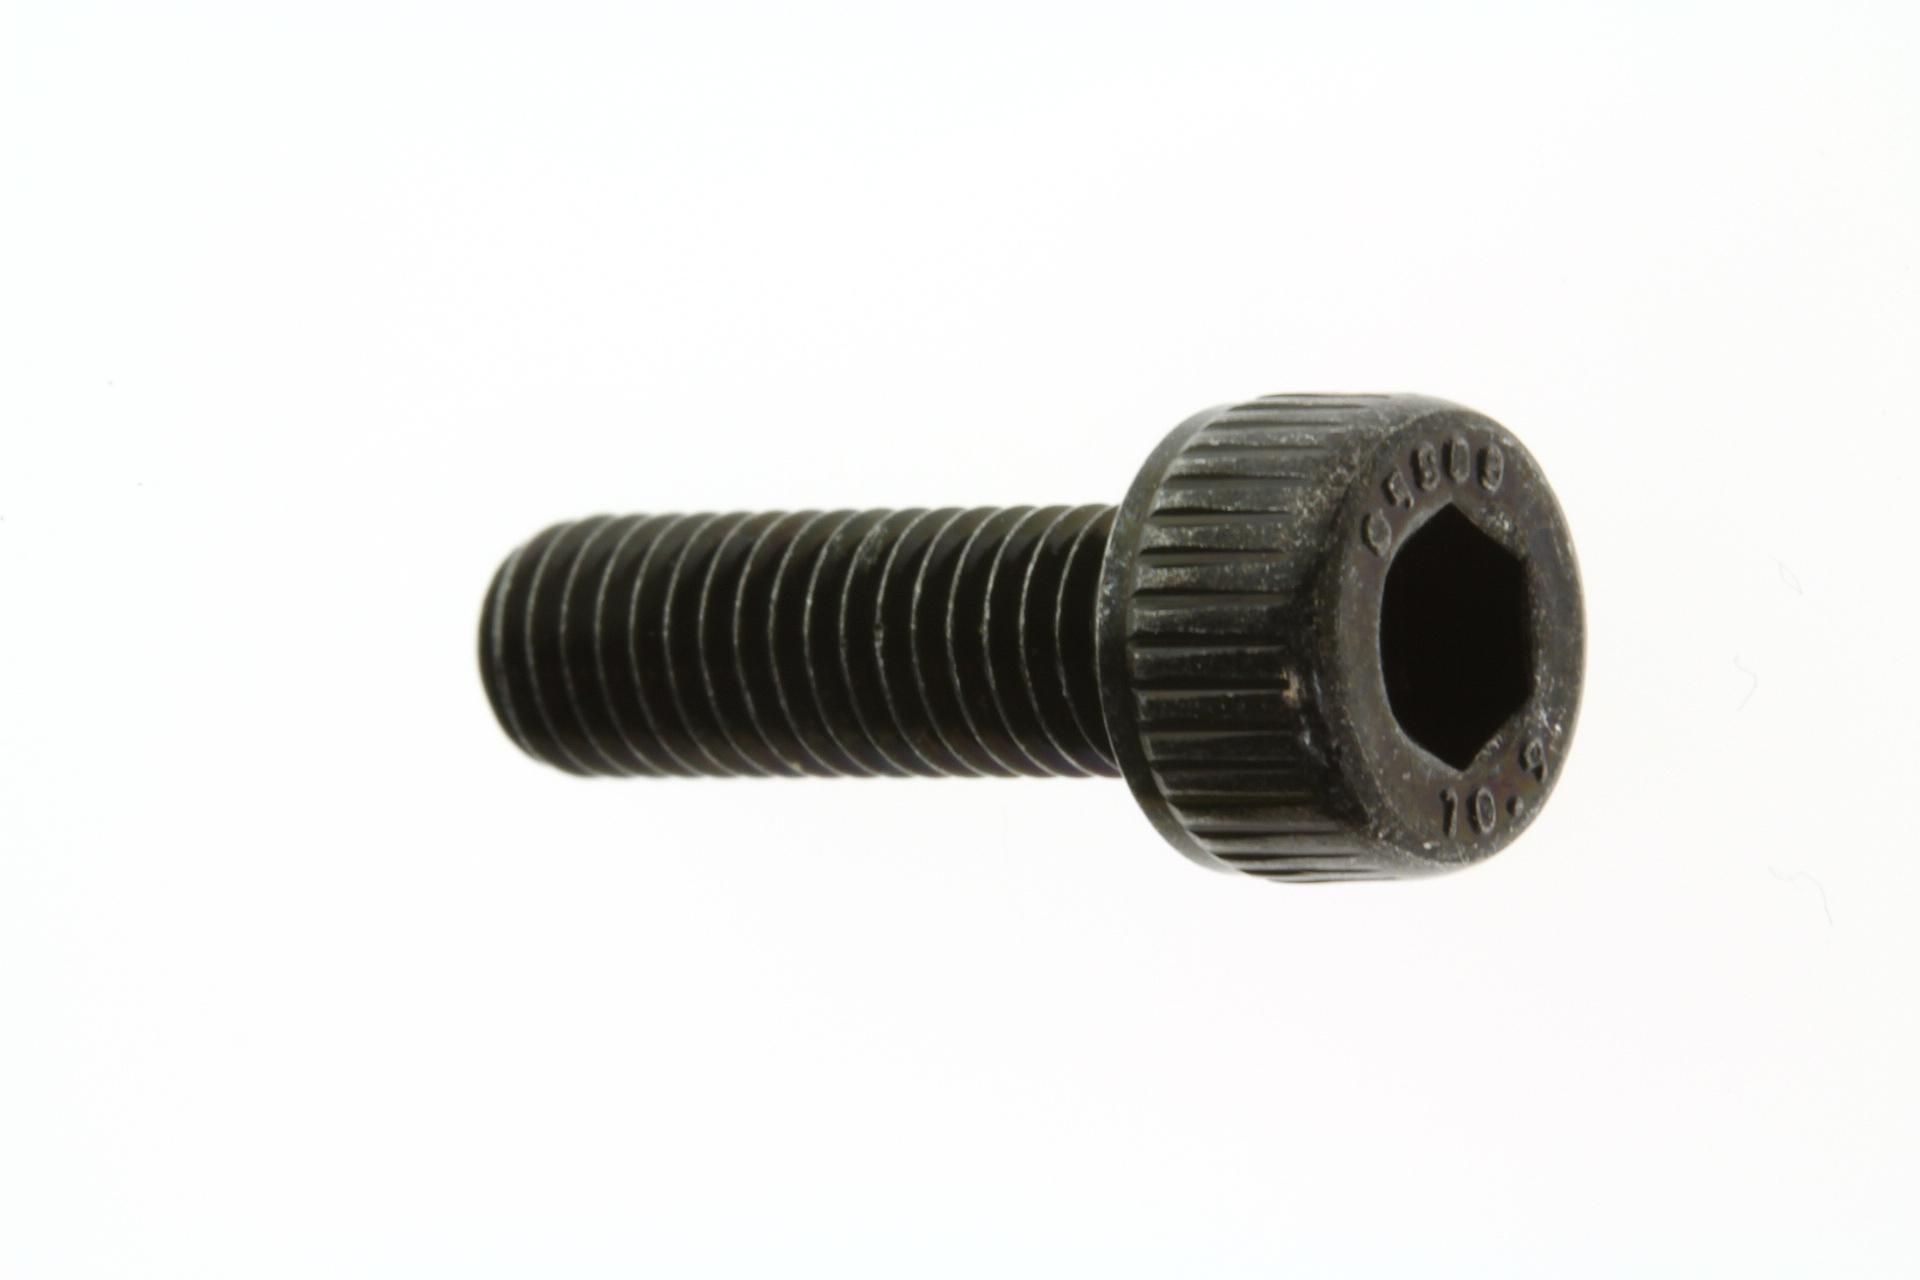 91316-05016-00 Superseded by 91317-05016-00 - BOLT, SOCKET